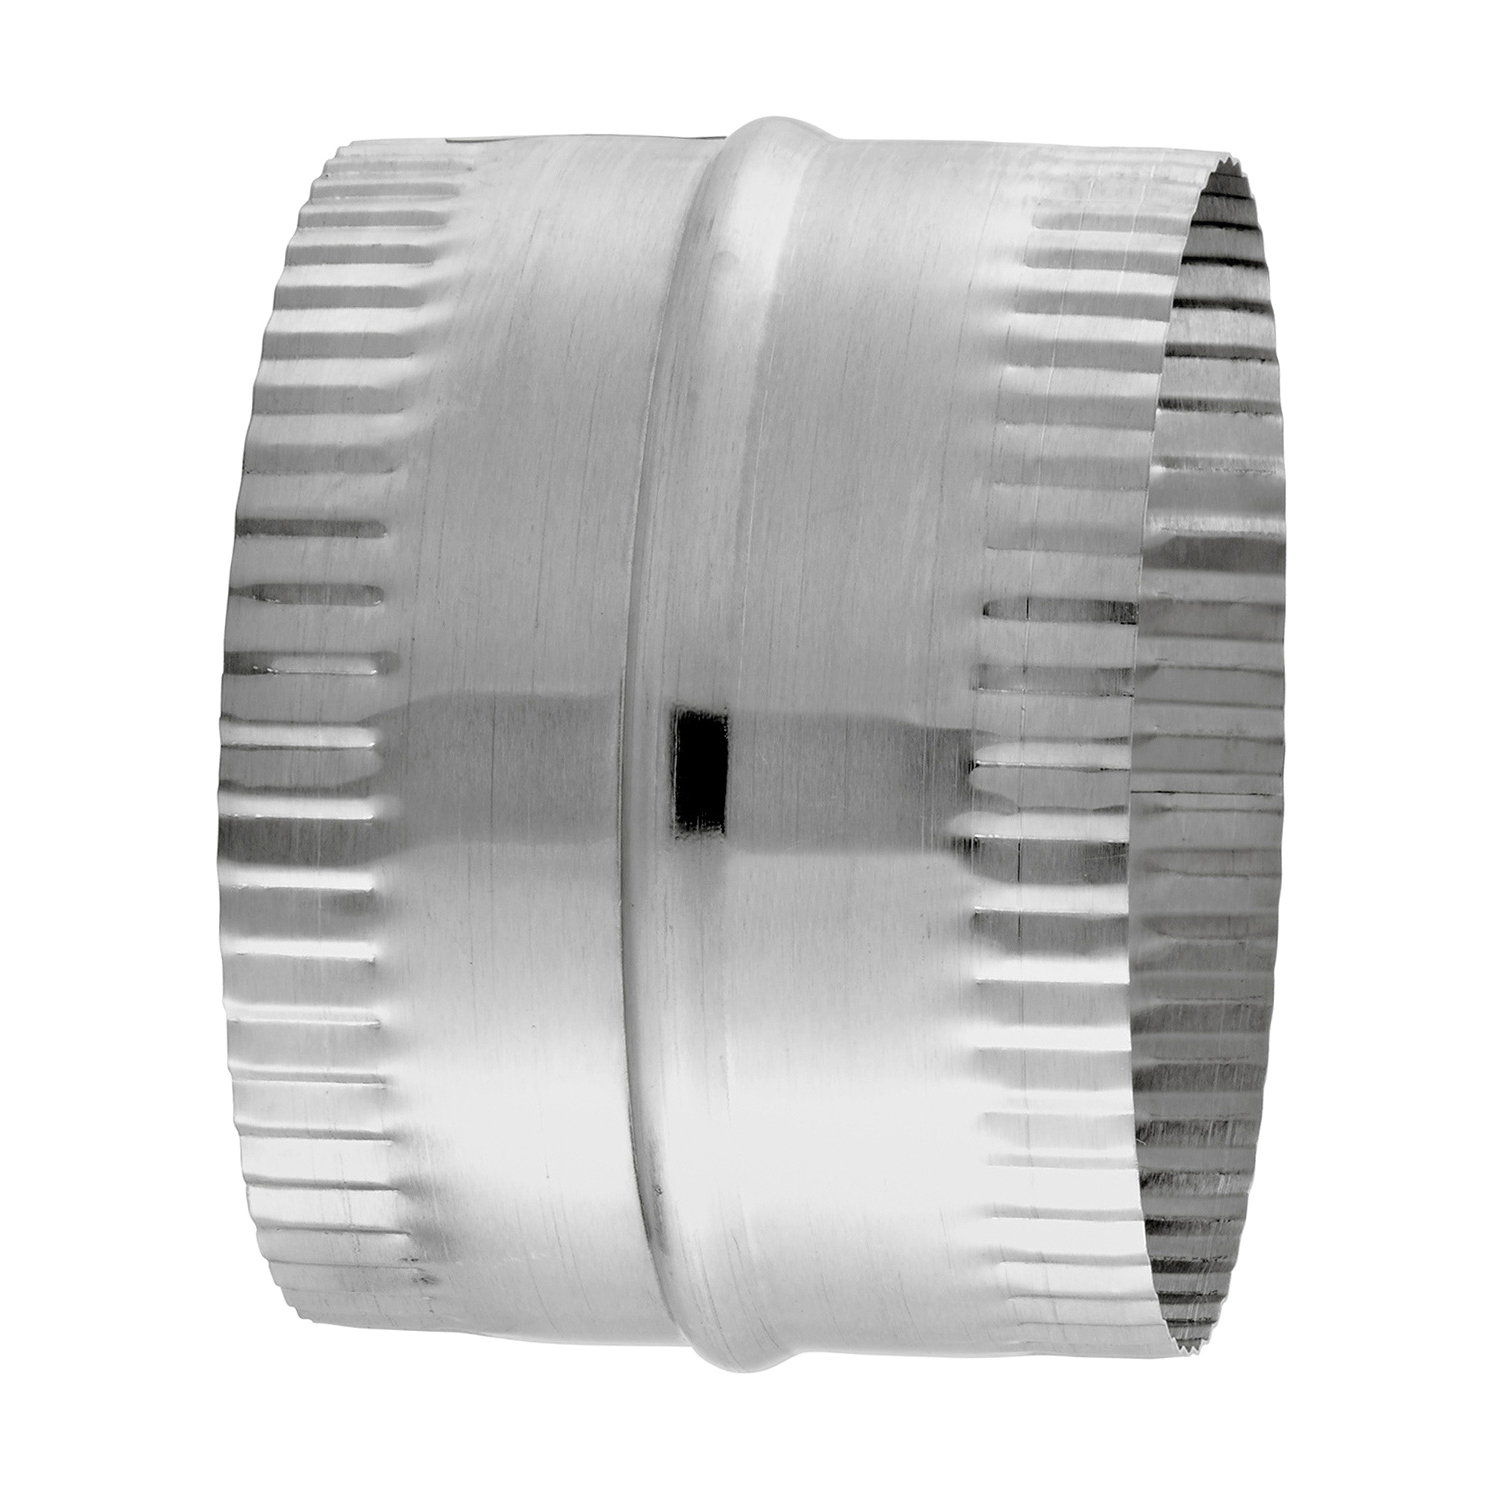 Lambro 246 Duct Connector, 6 in Union, Steel - 2